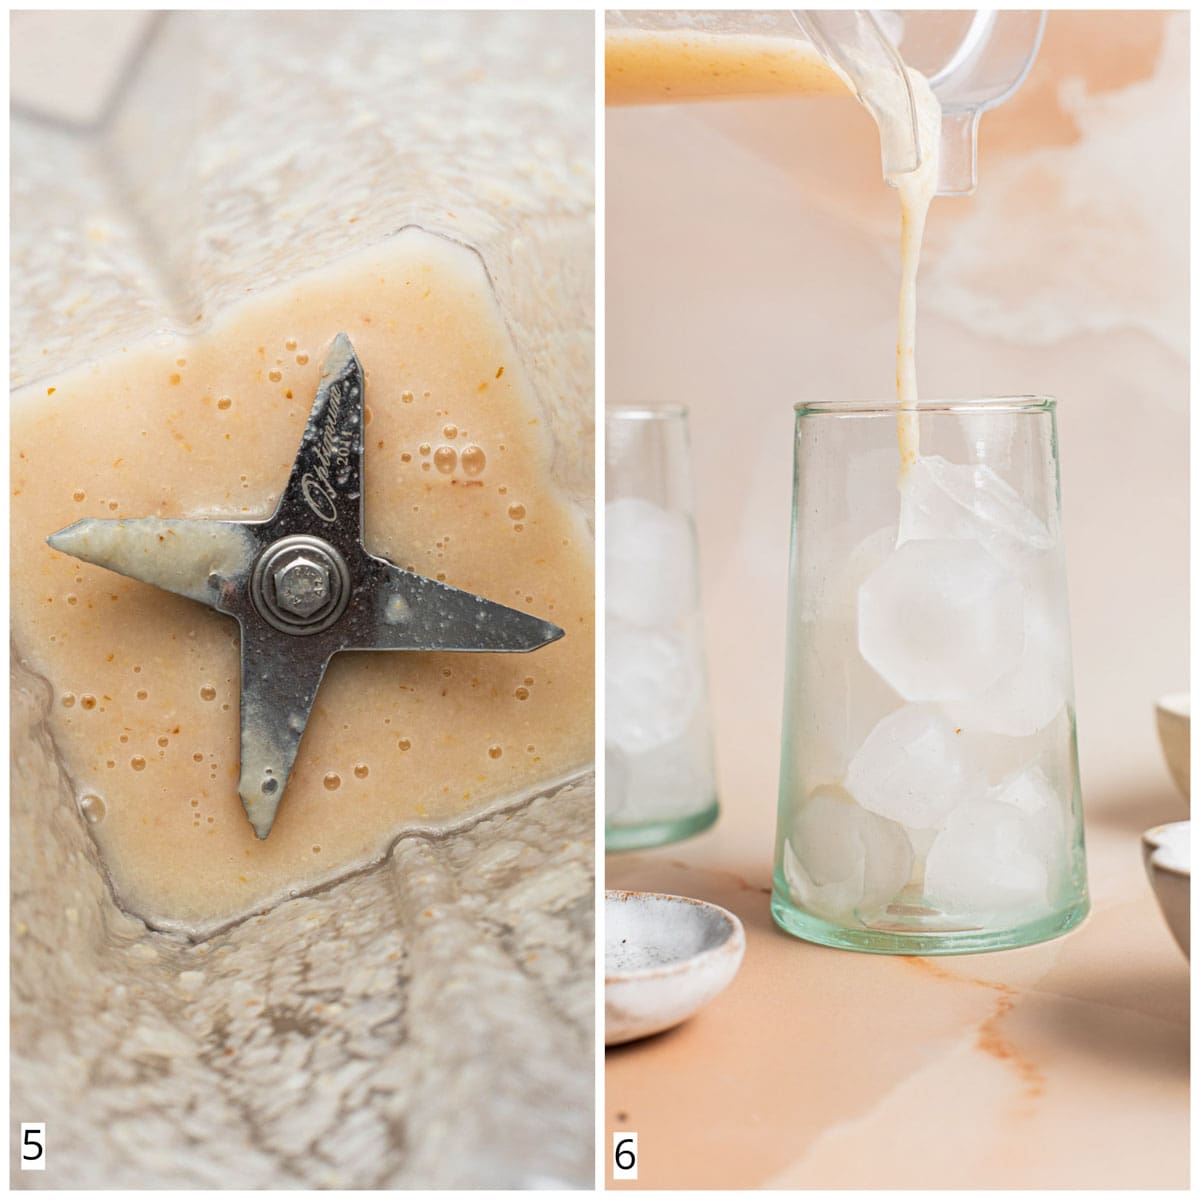 A collage of two images showing a close-up of a blender and a lychee puree being poured into a glass.